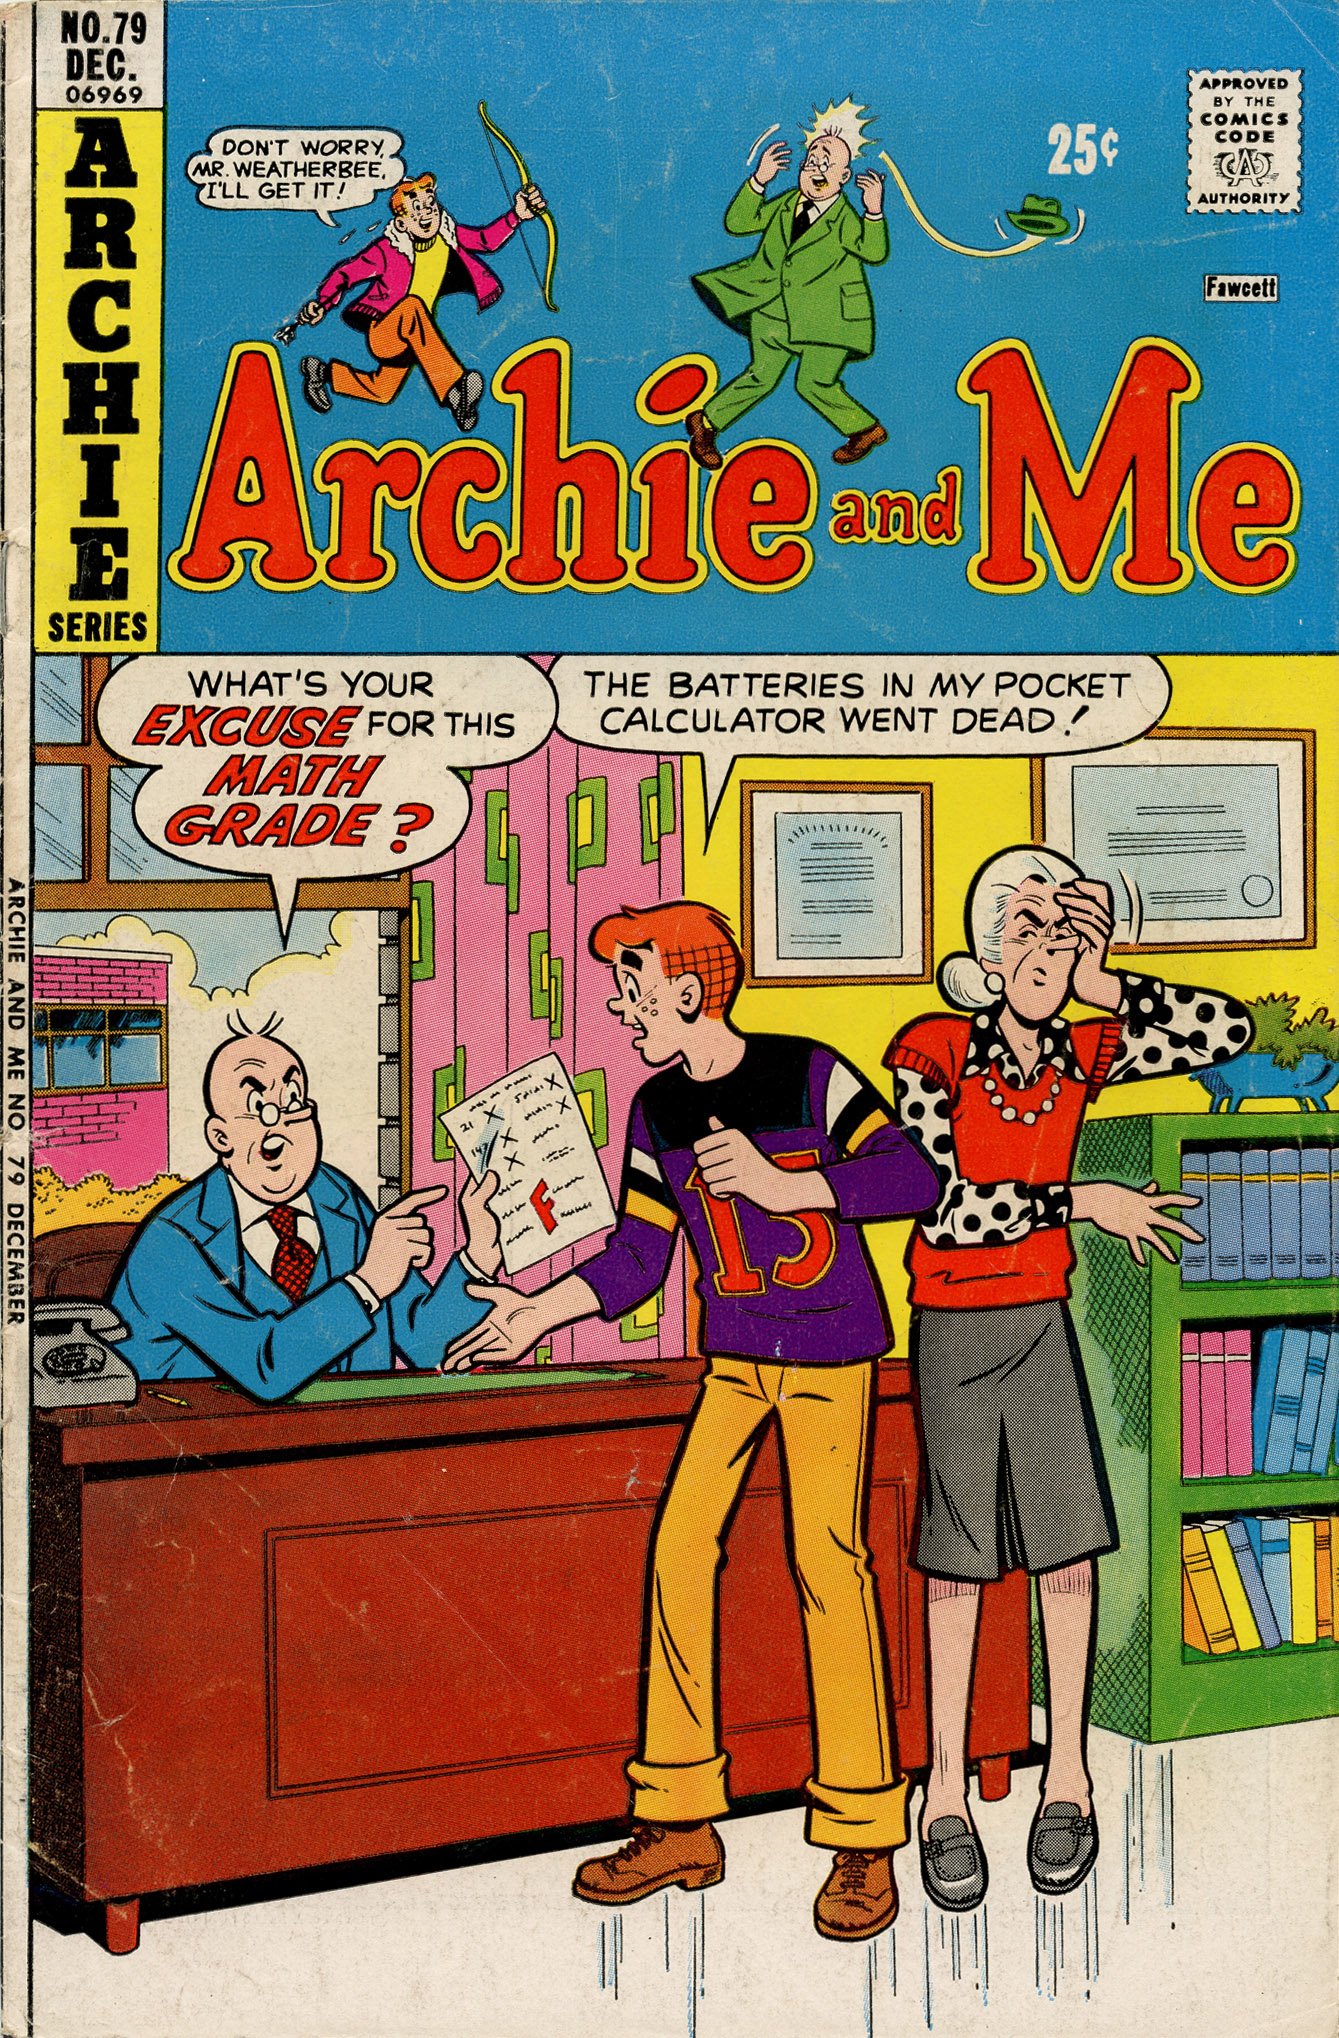 Read online Archie and Me comic -  Issue #79 - 1